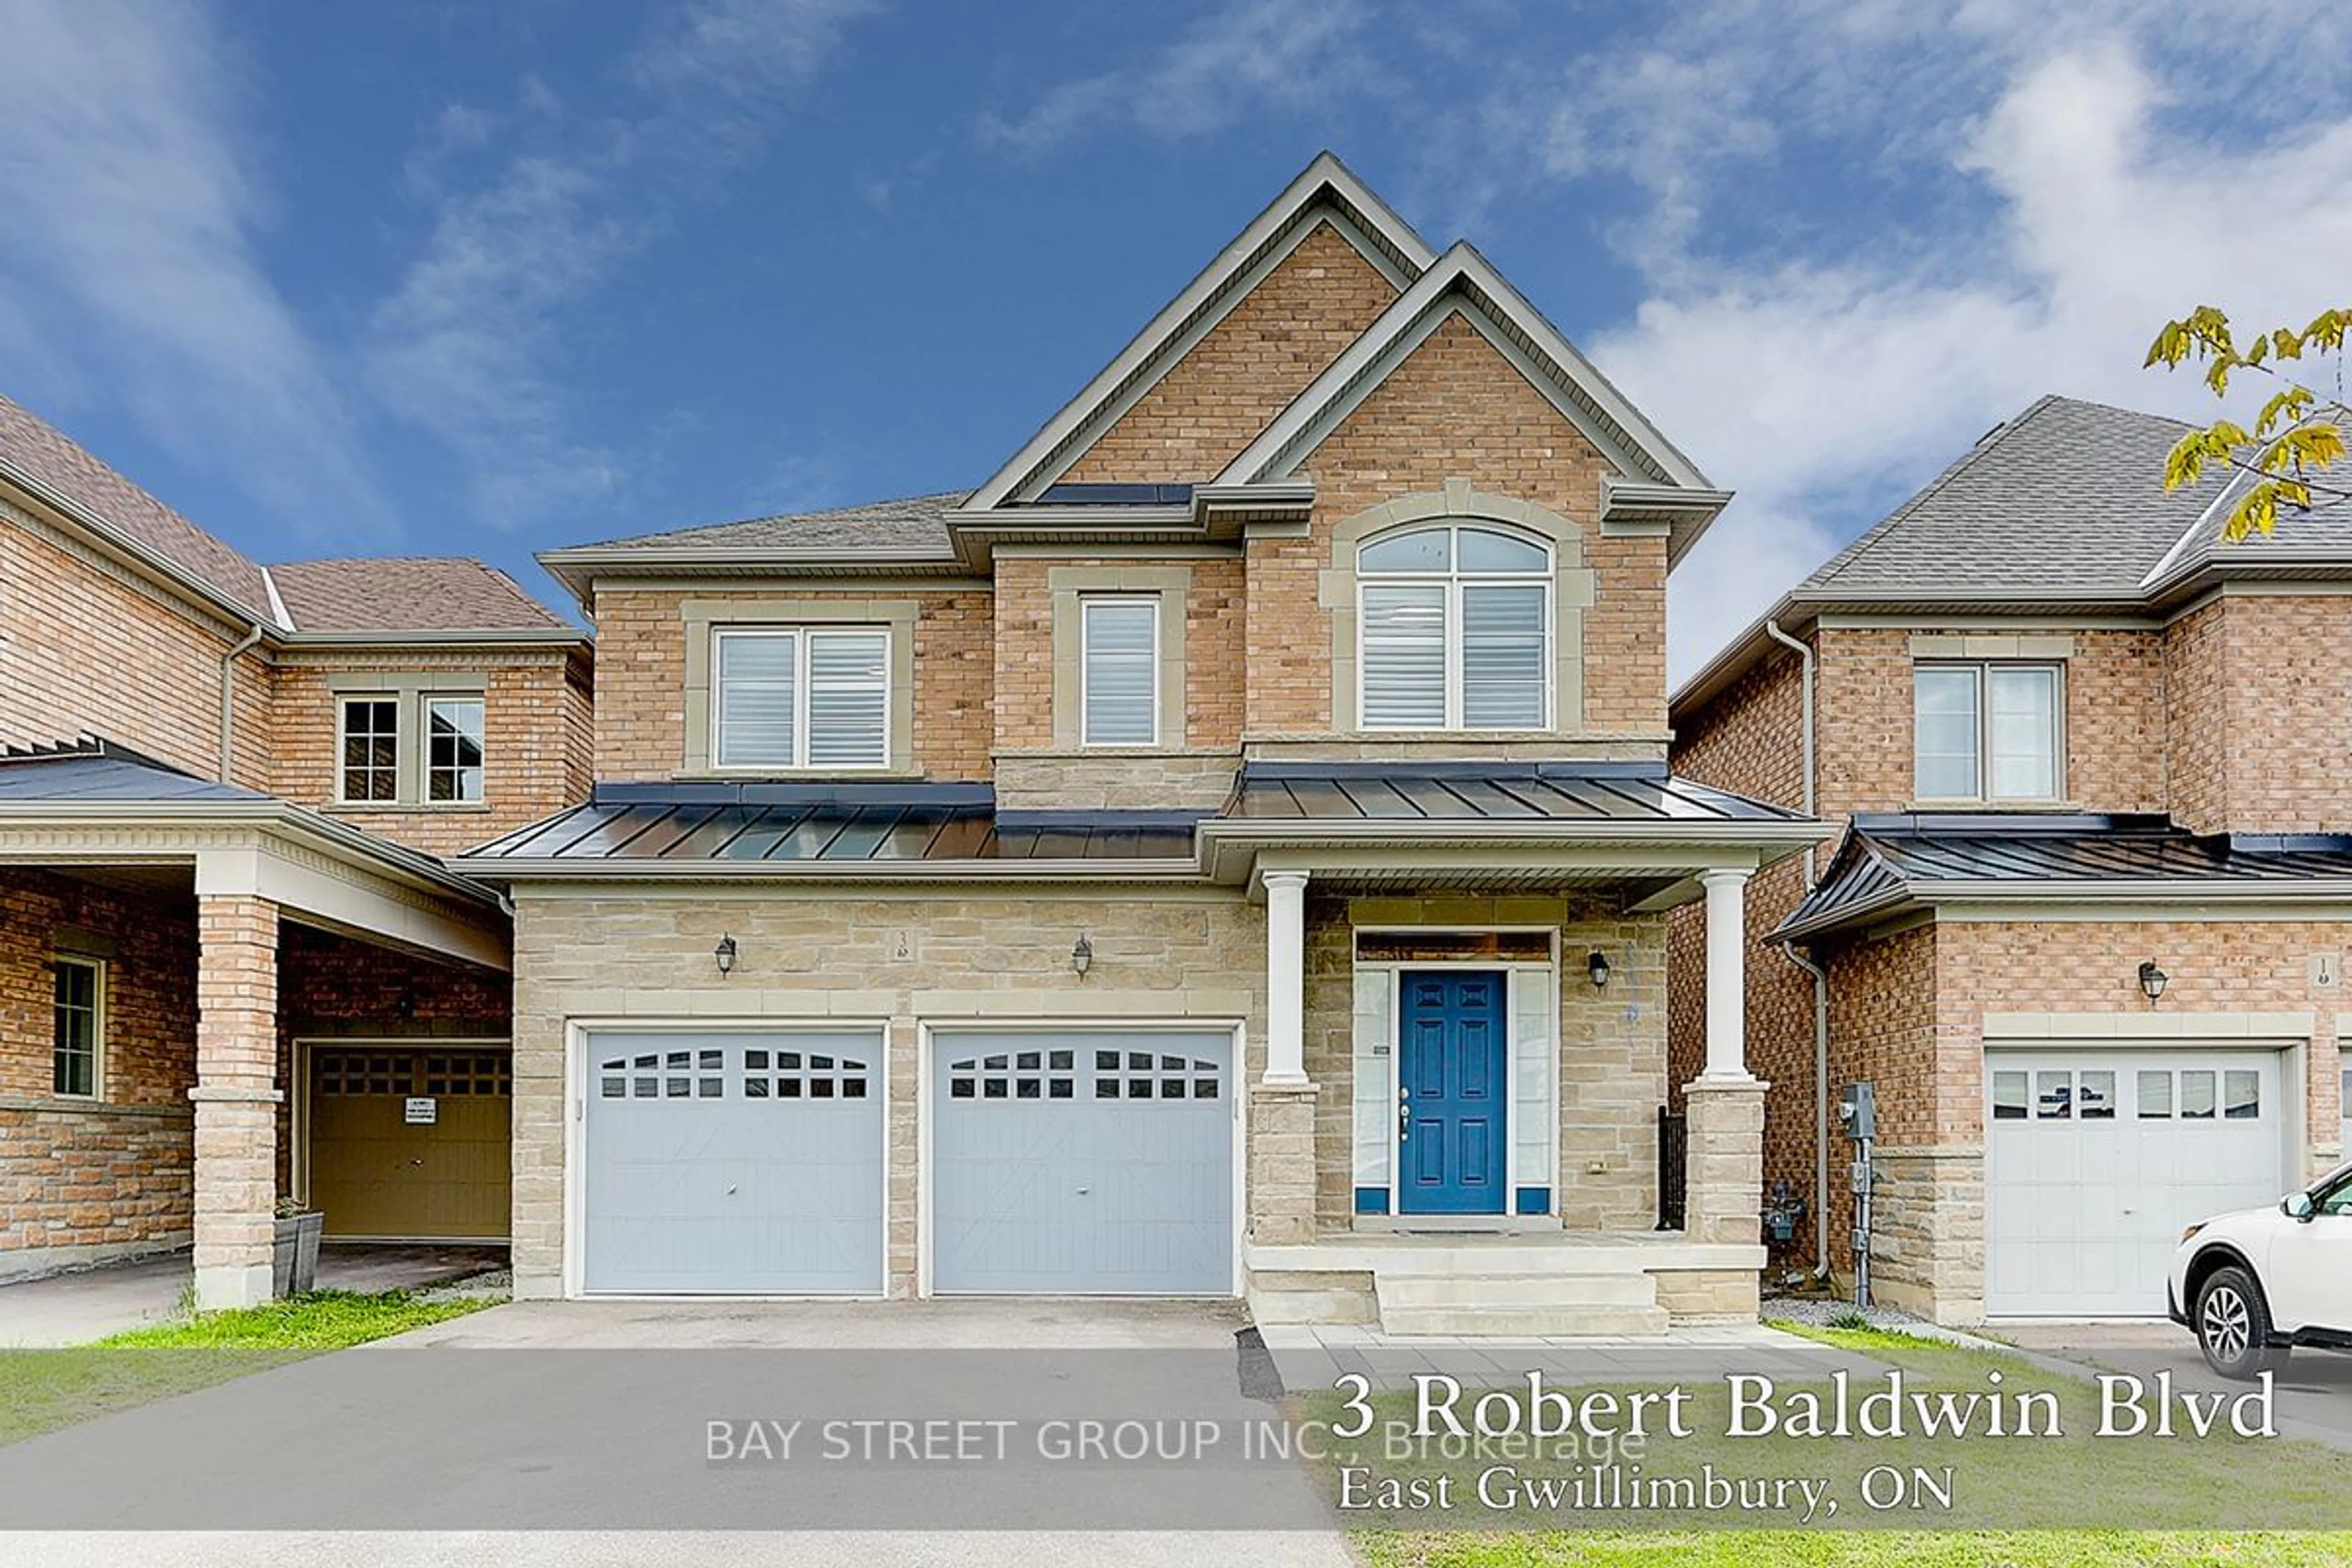 Home with brick exterior material for 3 Robert Baldwin Blvd, East Gwillimbury Ontario L9N 0R3